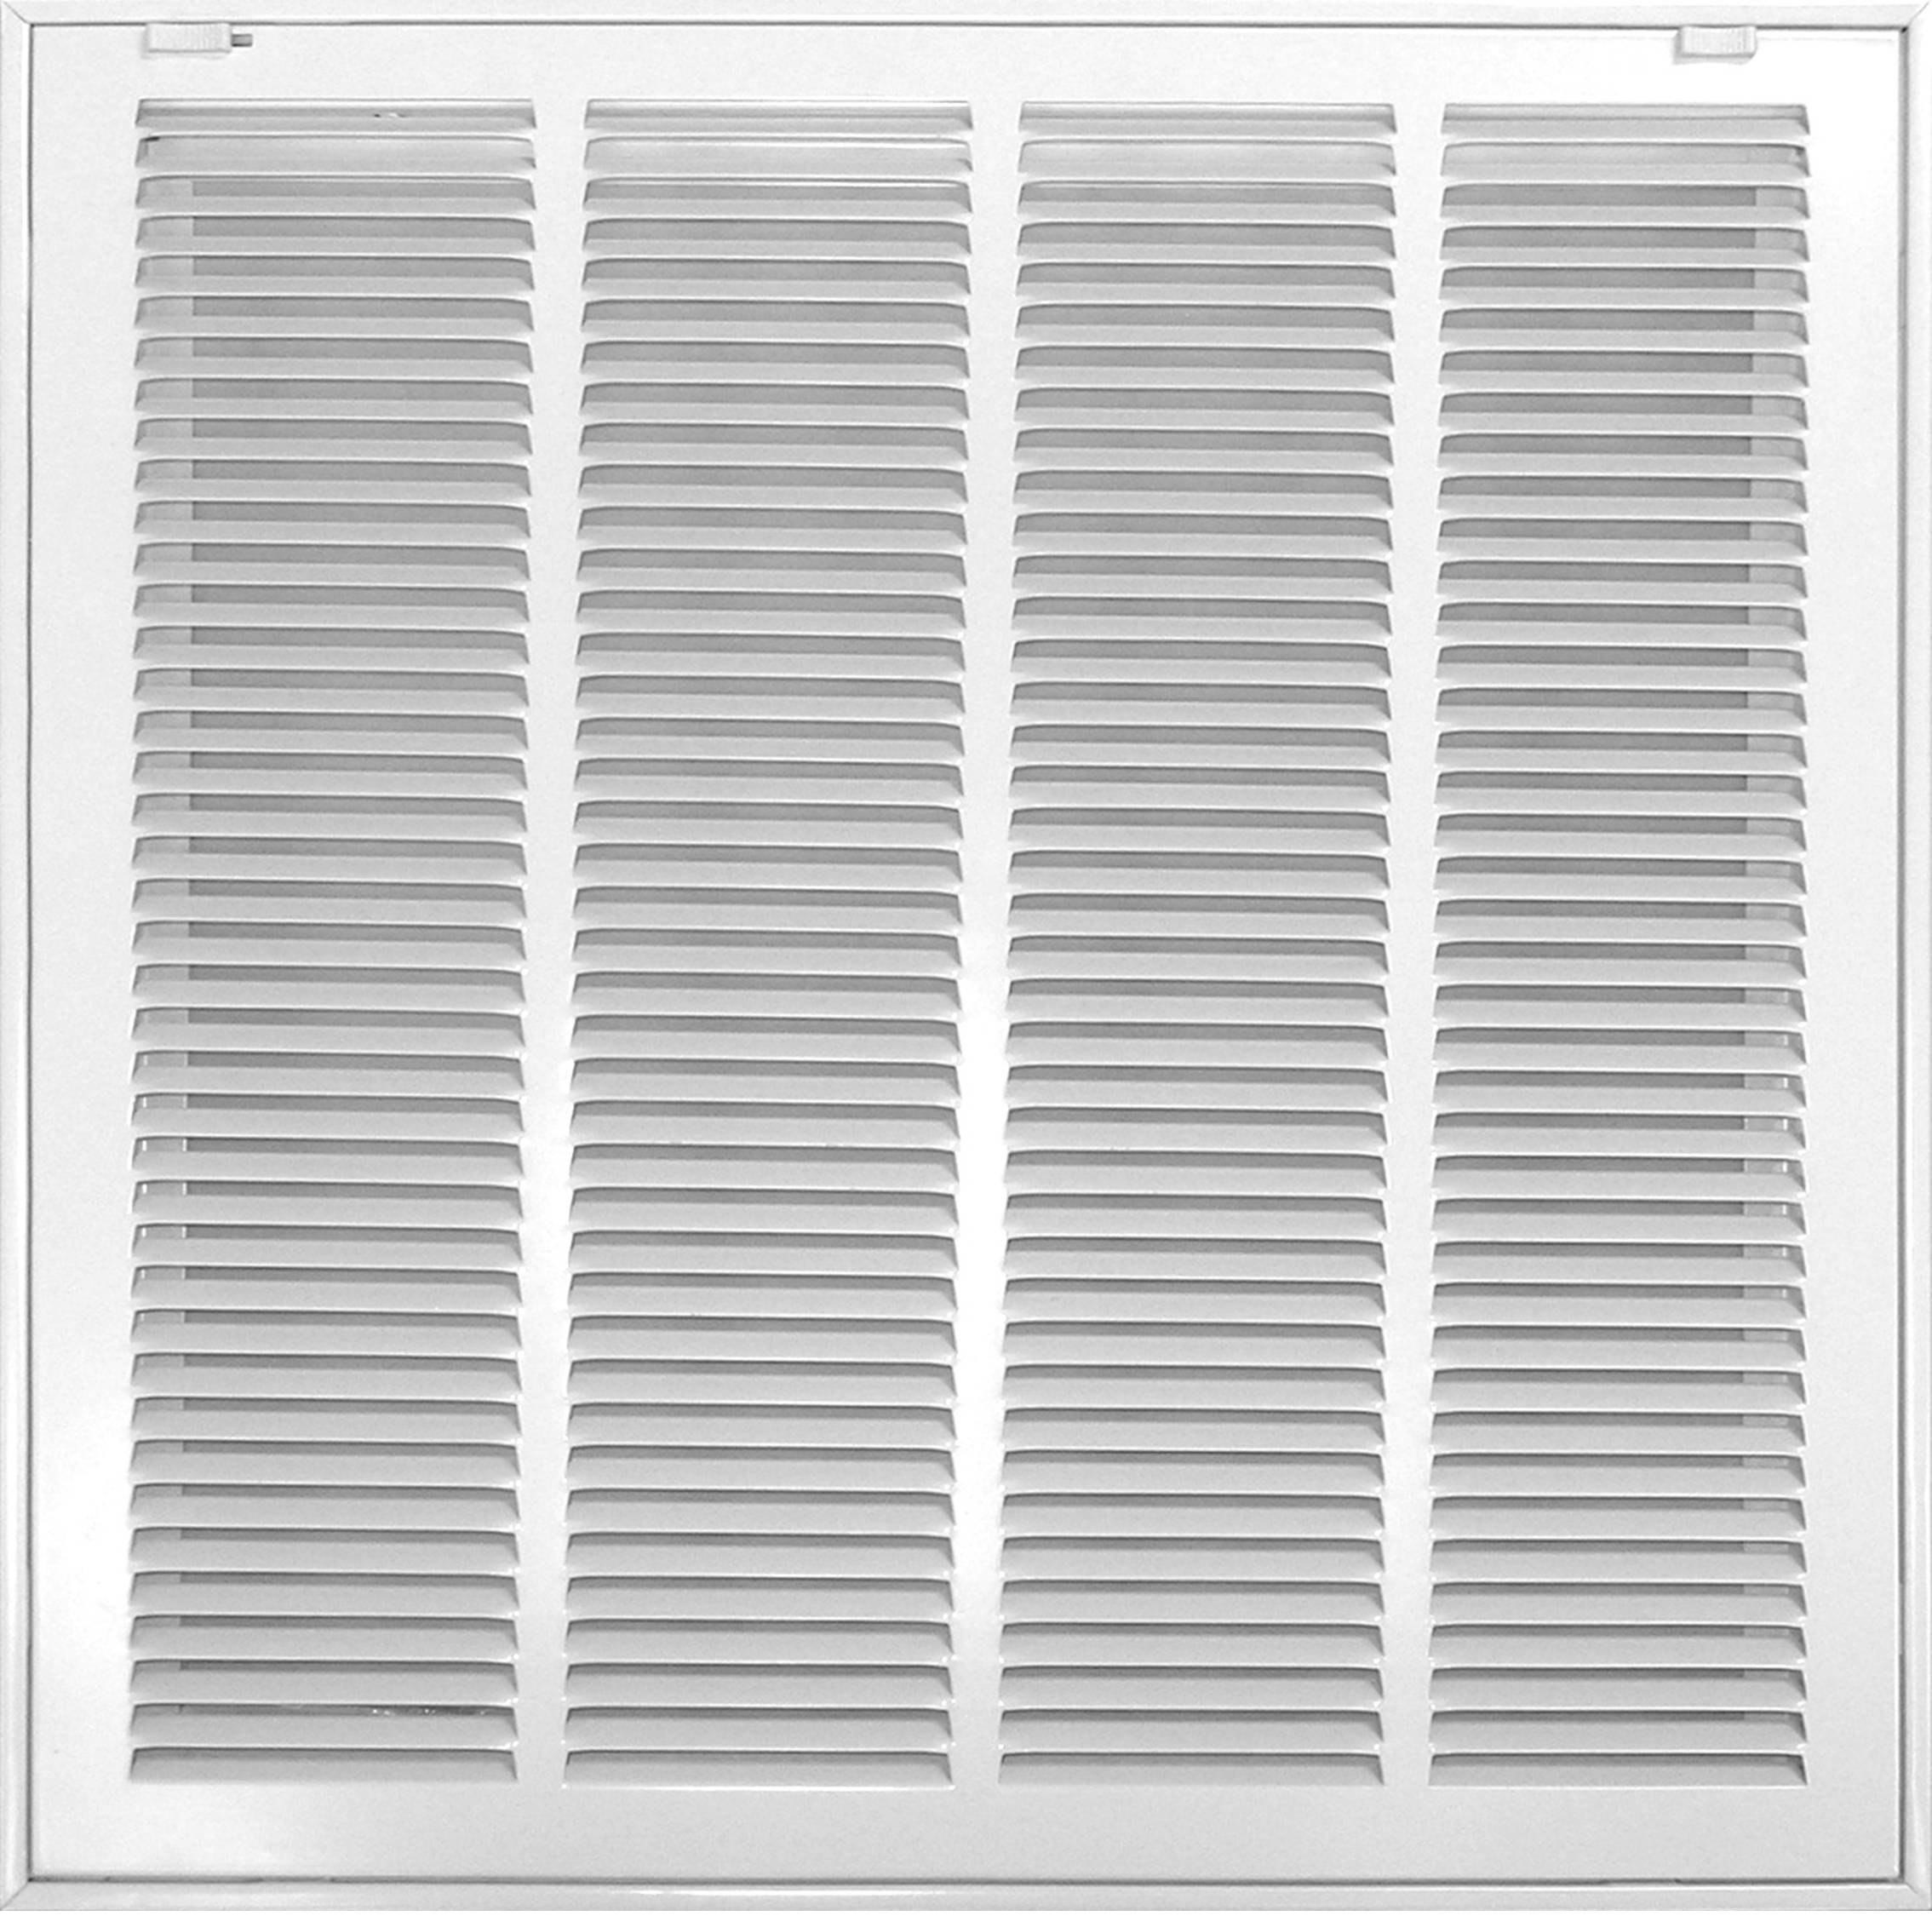 Sidewall Ceiling Grilles Louvered Durable White Finish Steel 14 X 14 Inches 